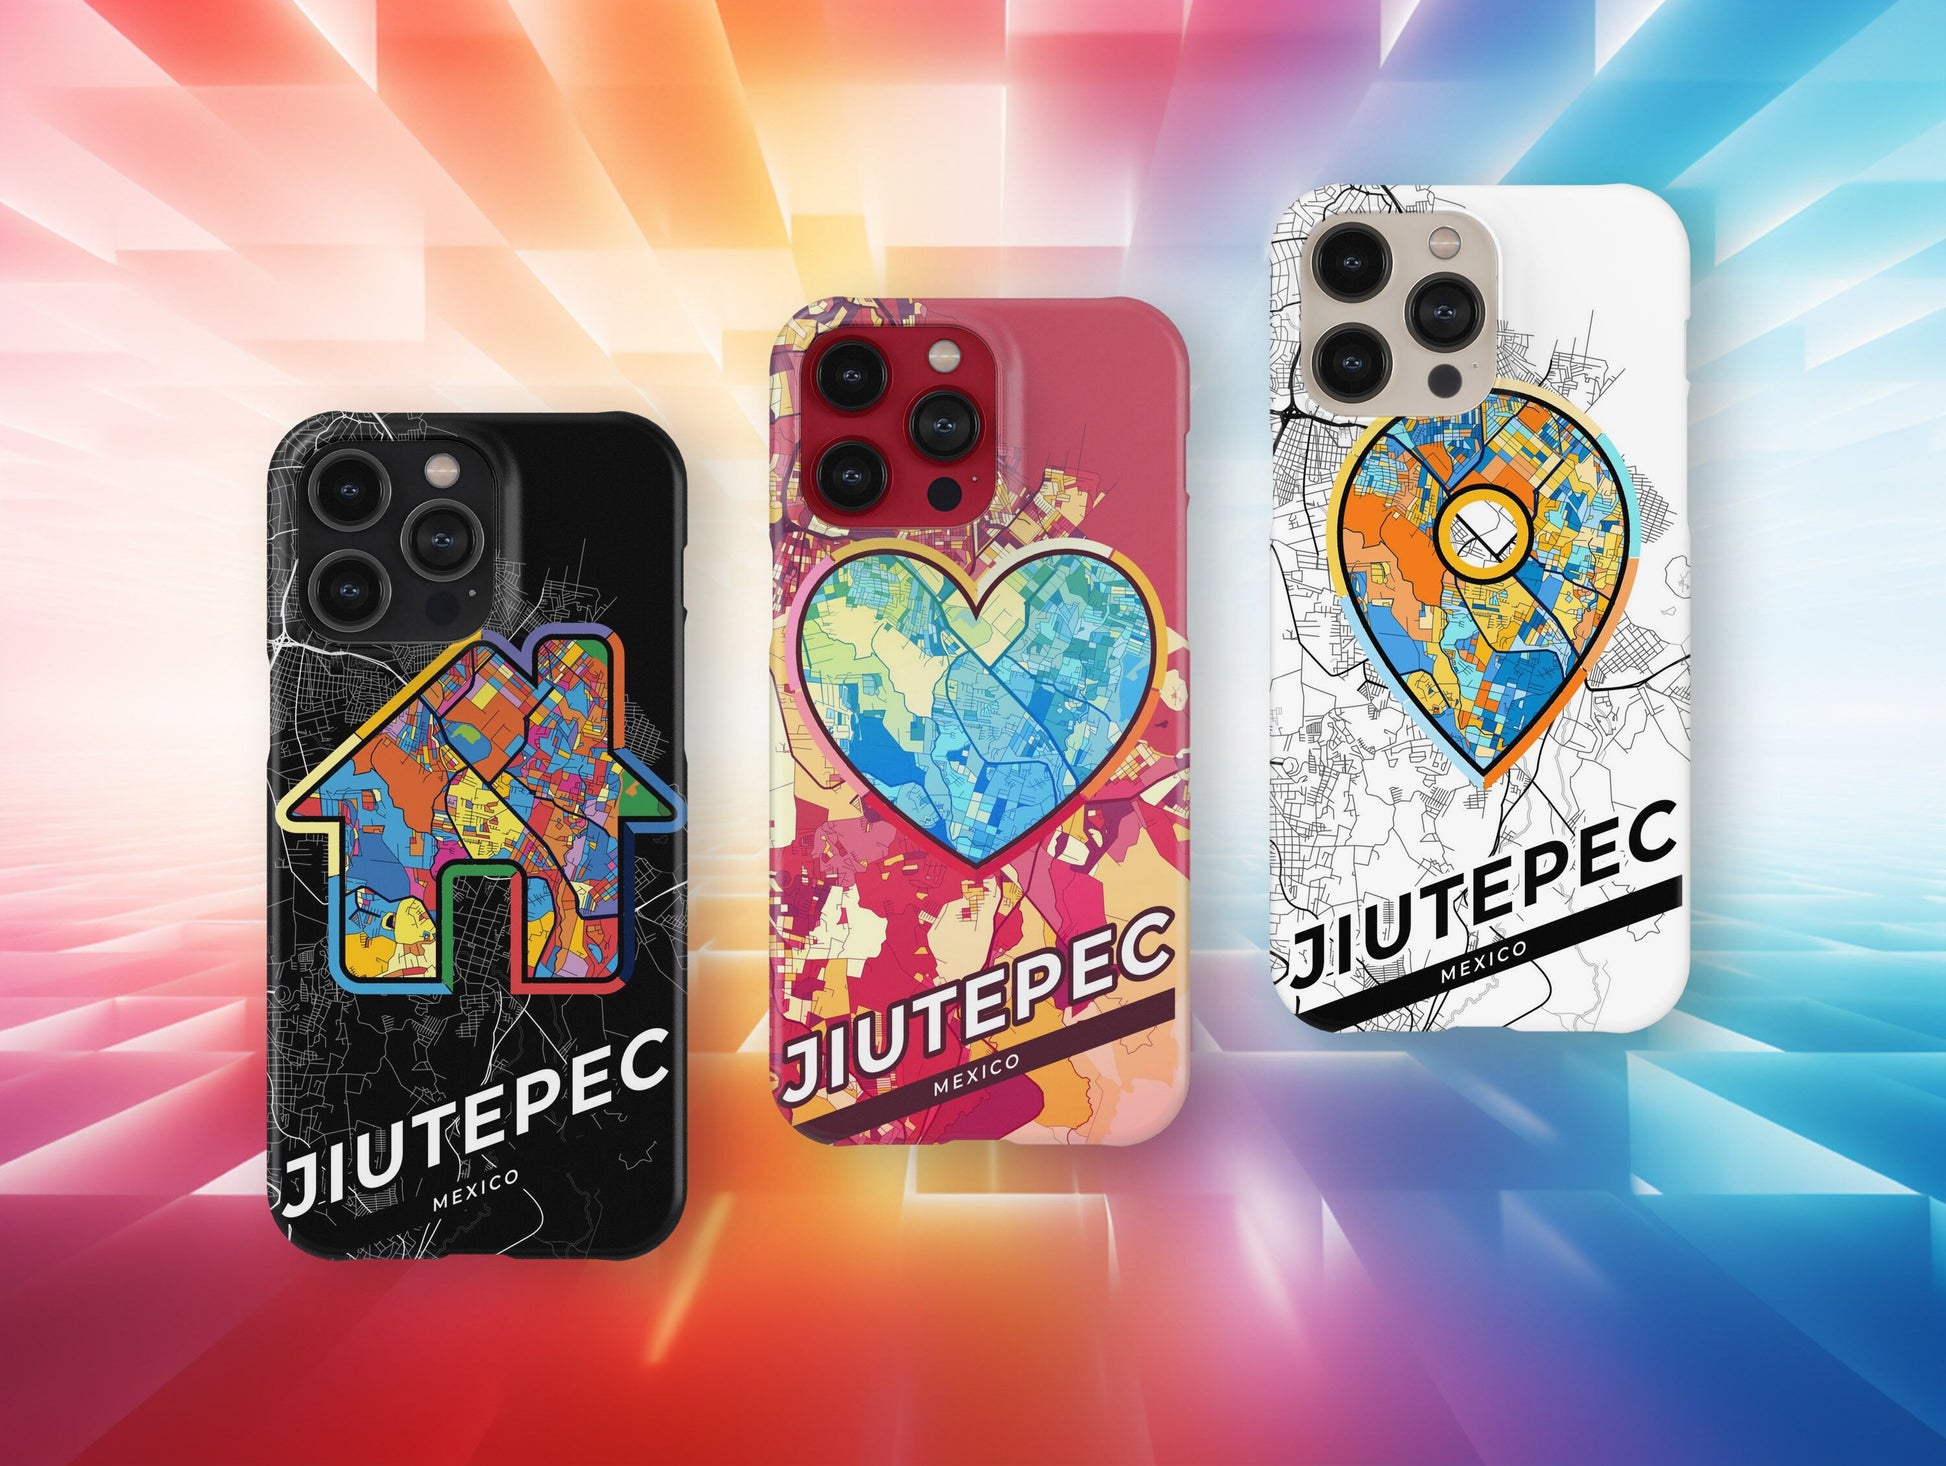 Jiutepec Mexico slim phone case with colorful icon. Birthday, wedding or housewarming gift. Couple match cases.